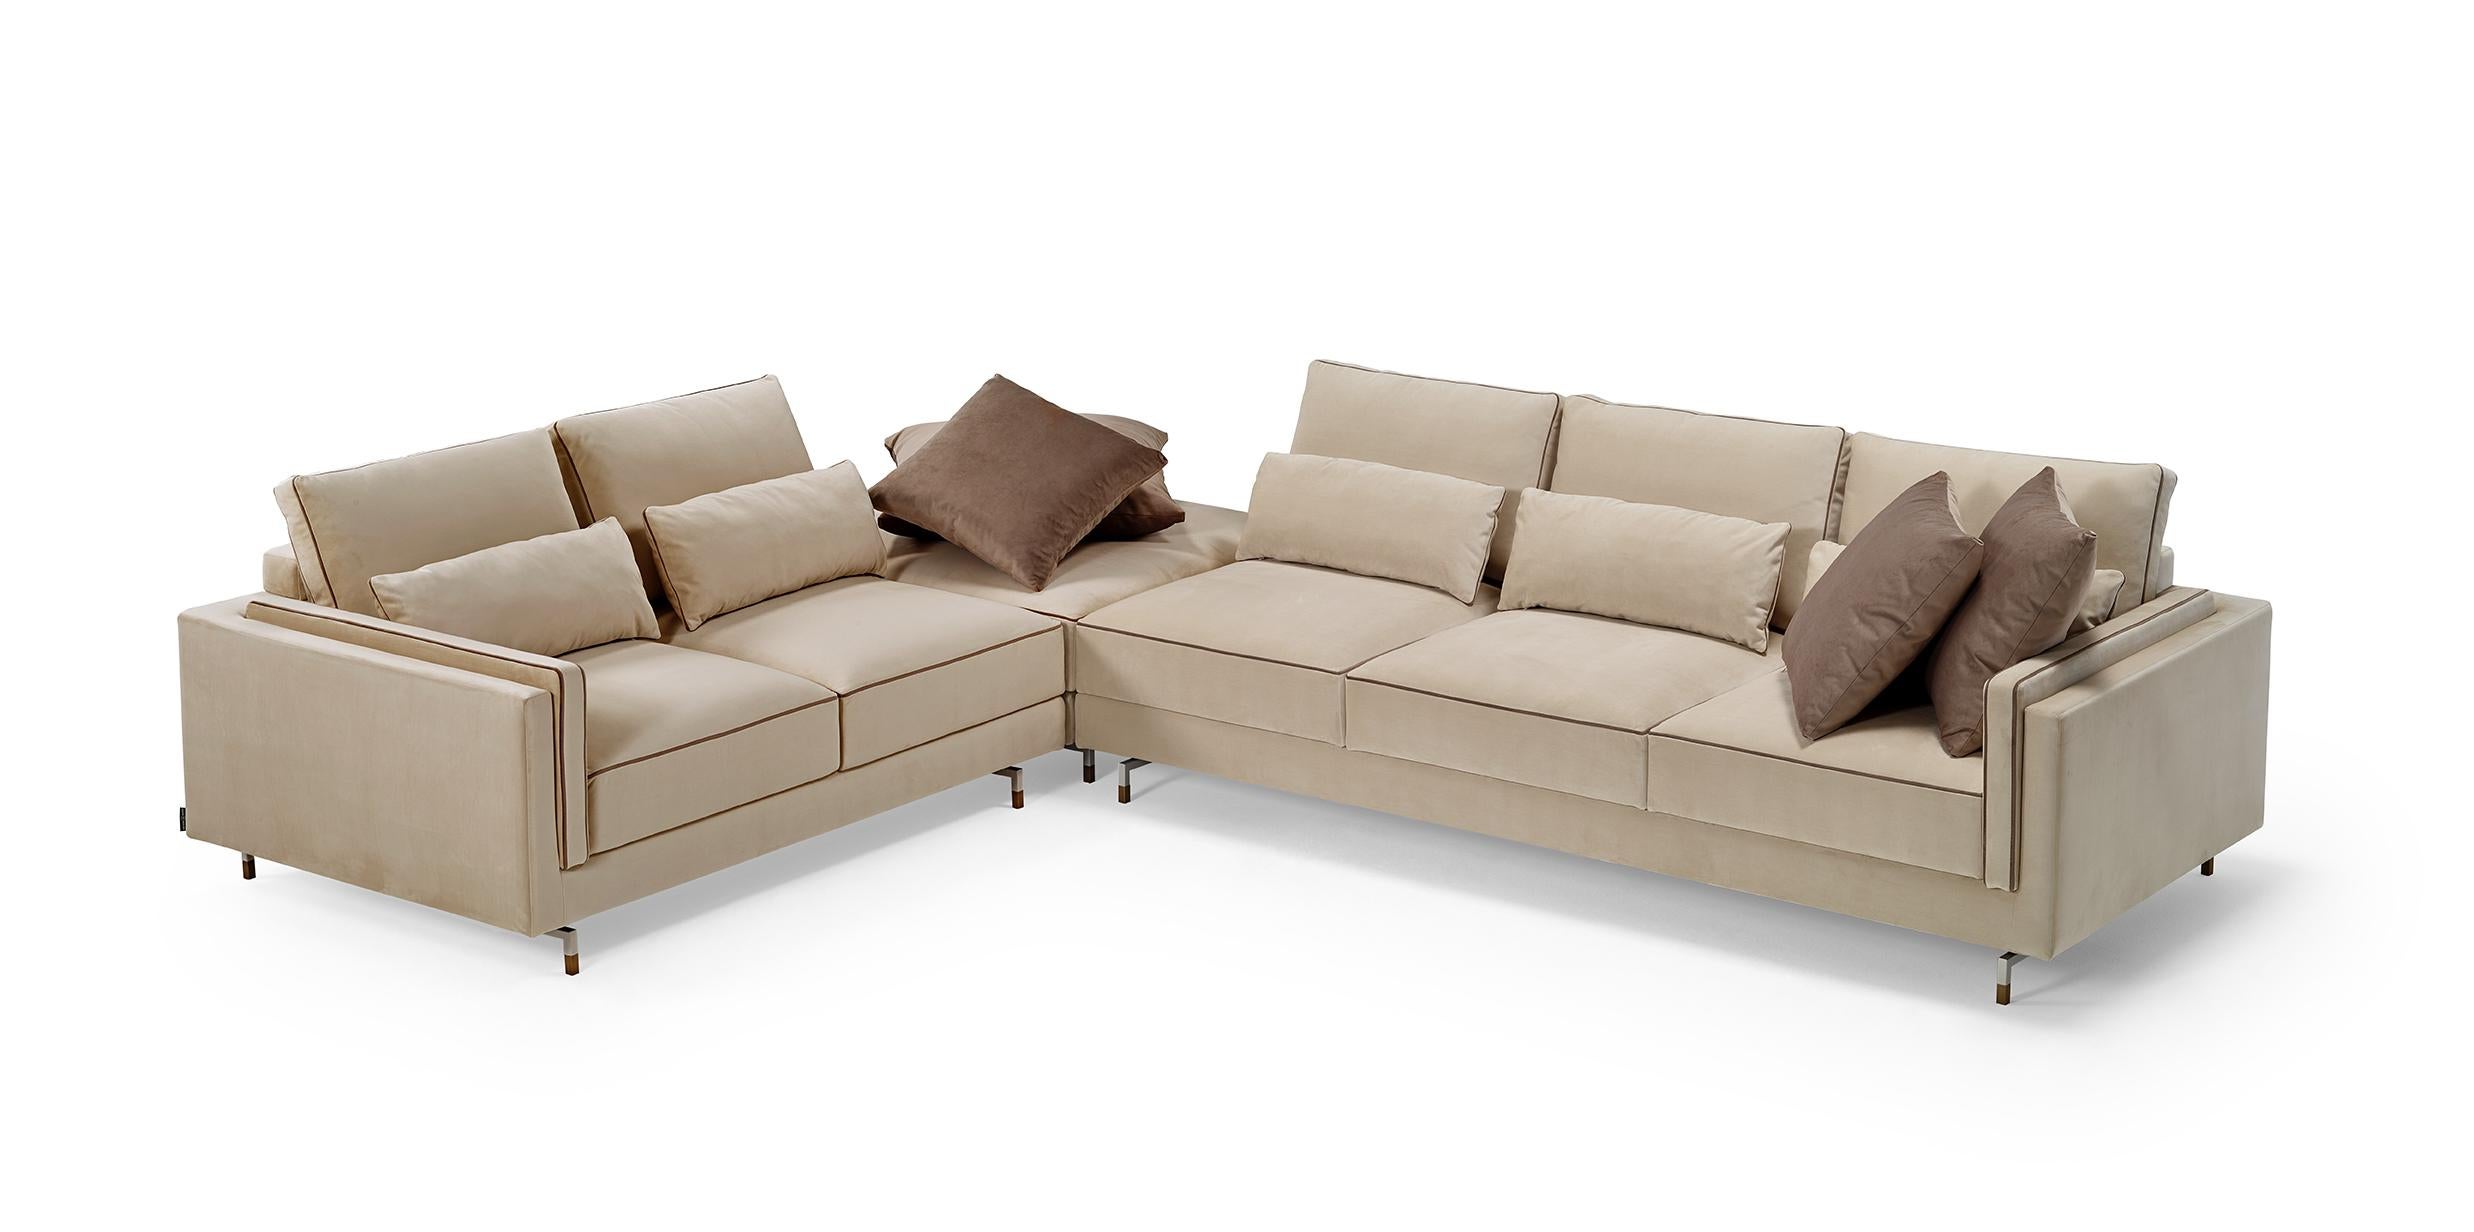 The SINATRA modular seating system is the result of a search for elegance, comfort and versatility combined with each other. The contemporary style design of the Sinatra sofa is characterized by a seamless contrast piping detail that defines its